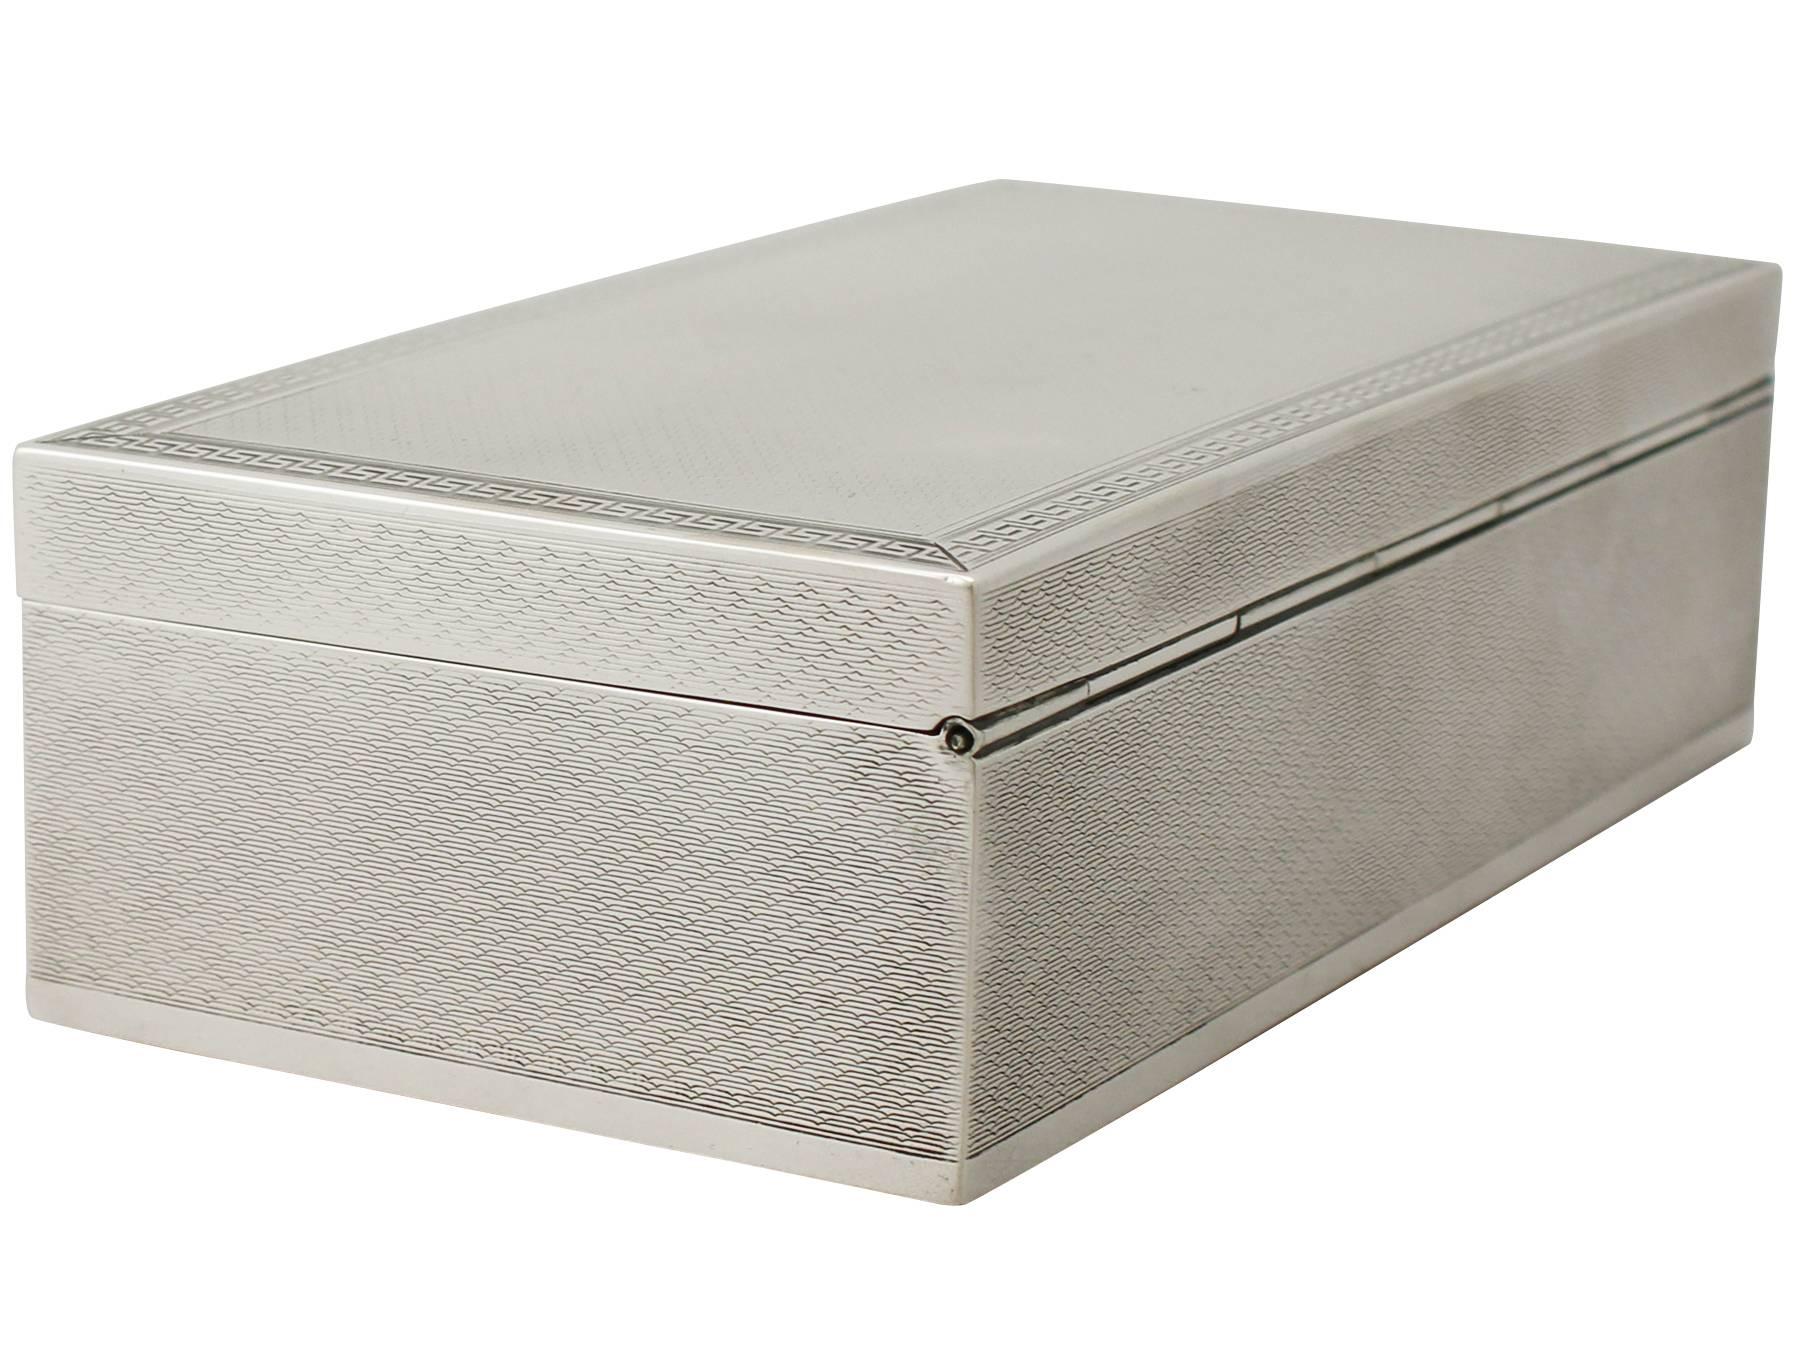 An exceptional, fine and impressive antique George V English sterling silver jewelry box, an addition to our collection of boxes and cases.

This exceptional antique George V sterling silver jewelry box has a plain rectangular form.

The surface of